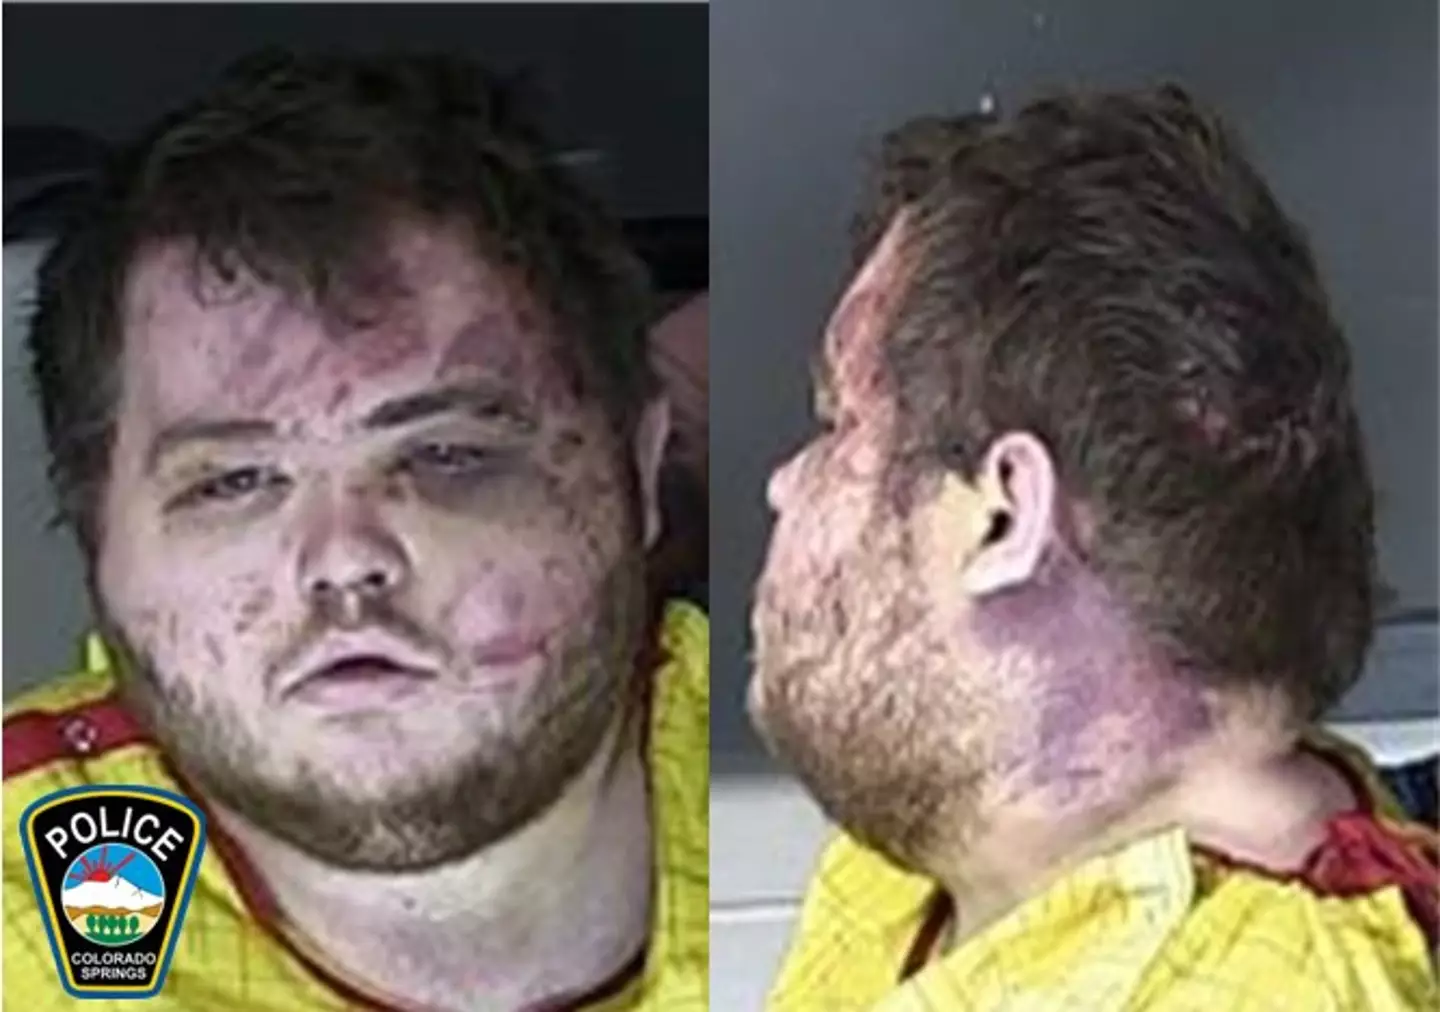 A mugshot of the Colorado nightclub suspect shows them with a beaten and bruised face.